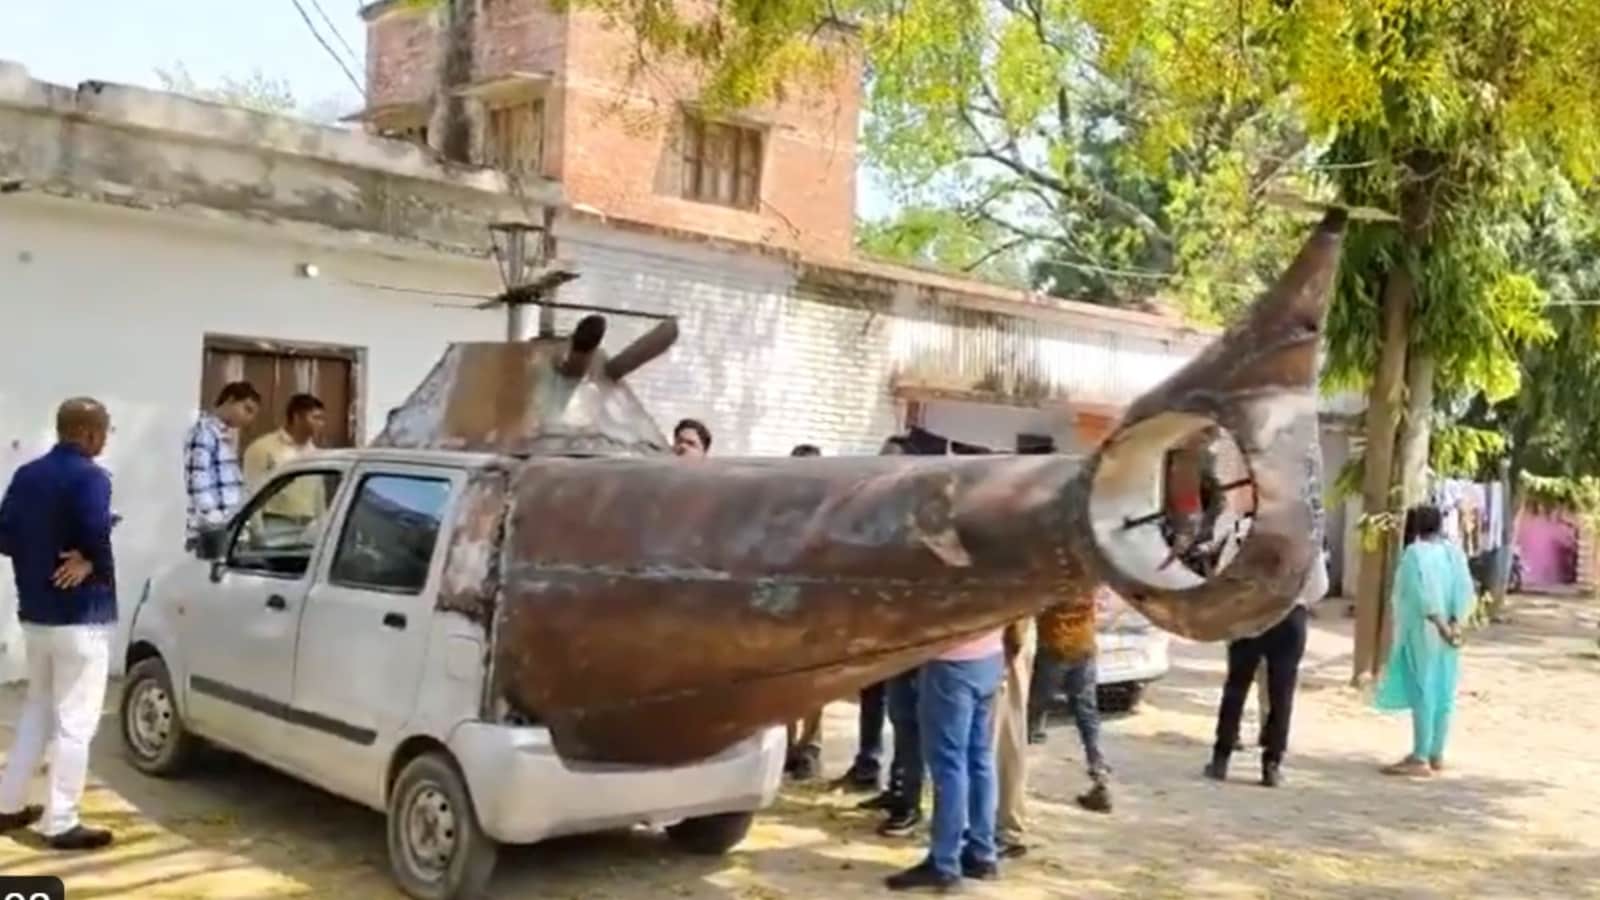 Brothers in UP’s Ambedkar Nagar convert Maruti Suzuki Wagon R into a helicopter, police seize the vehicle